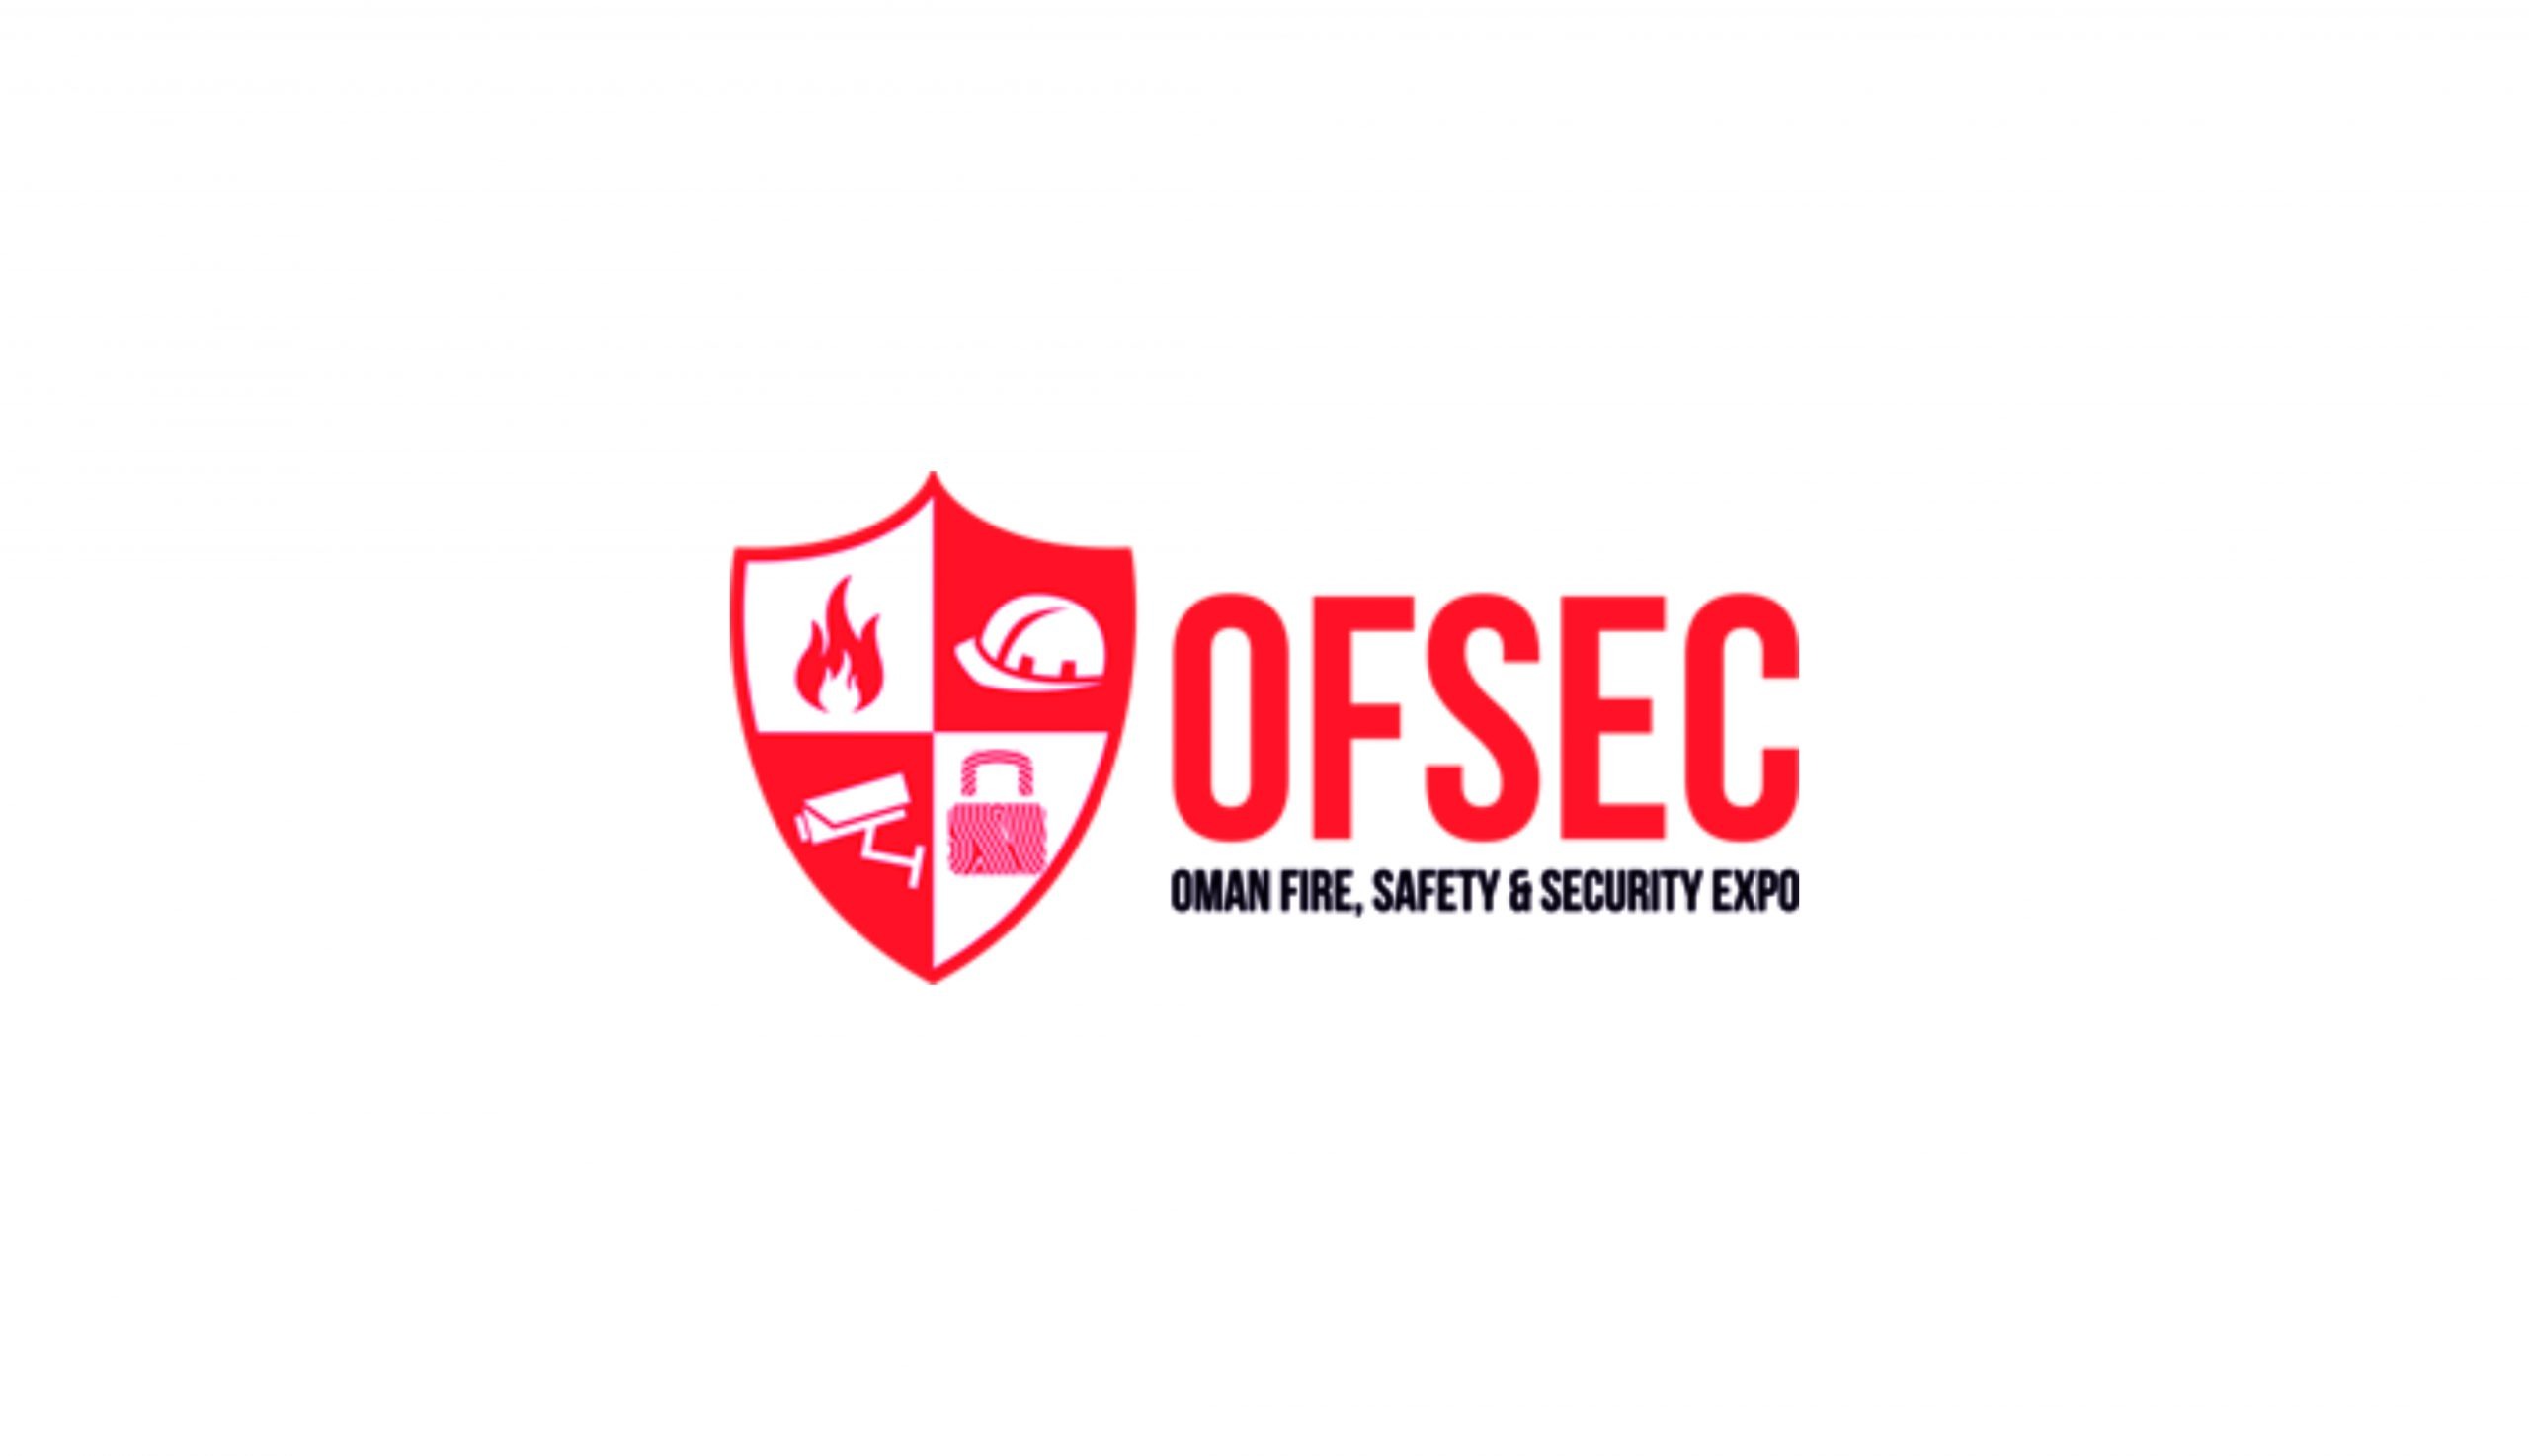 OFSEC Oman Fire, Safety and Security Expo - 5 to September 7, 2016